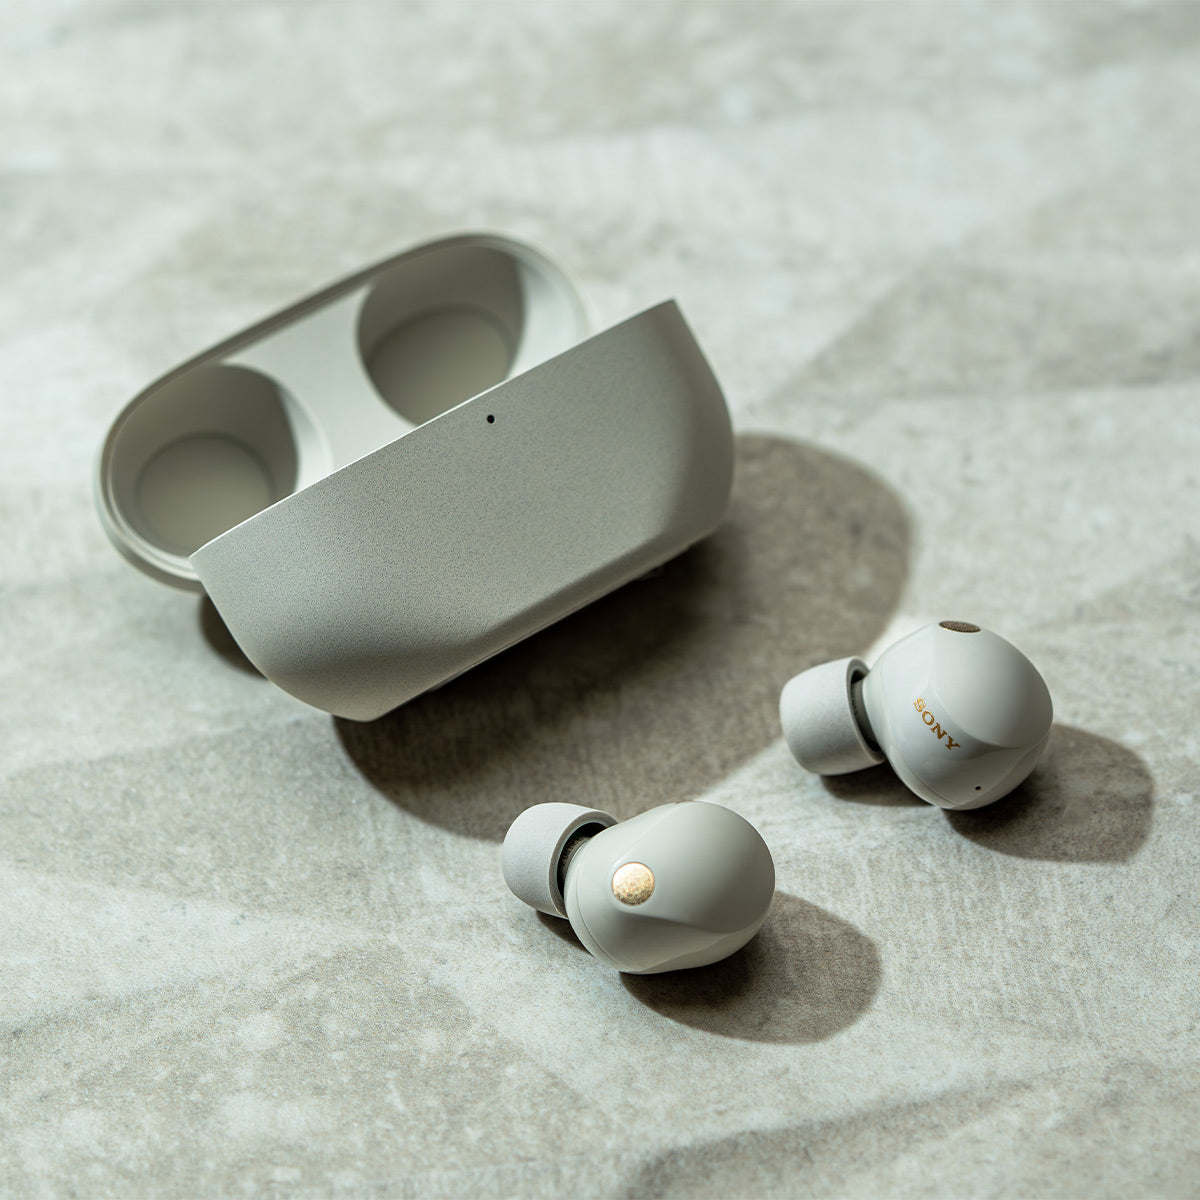 Sony WF-1000XM5 Wireless Noise-Canceling Earbuds Review